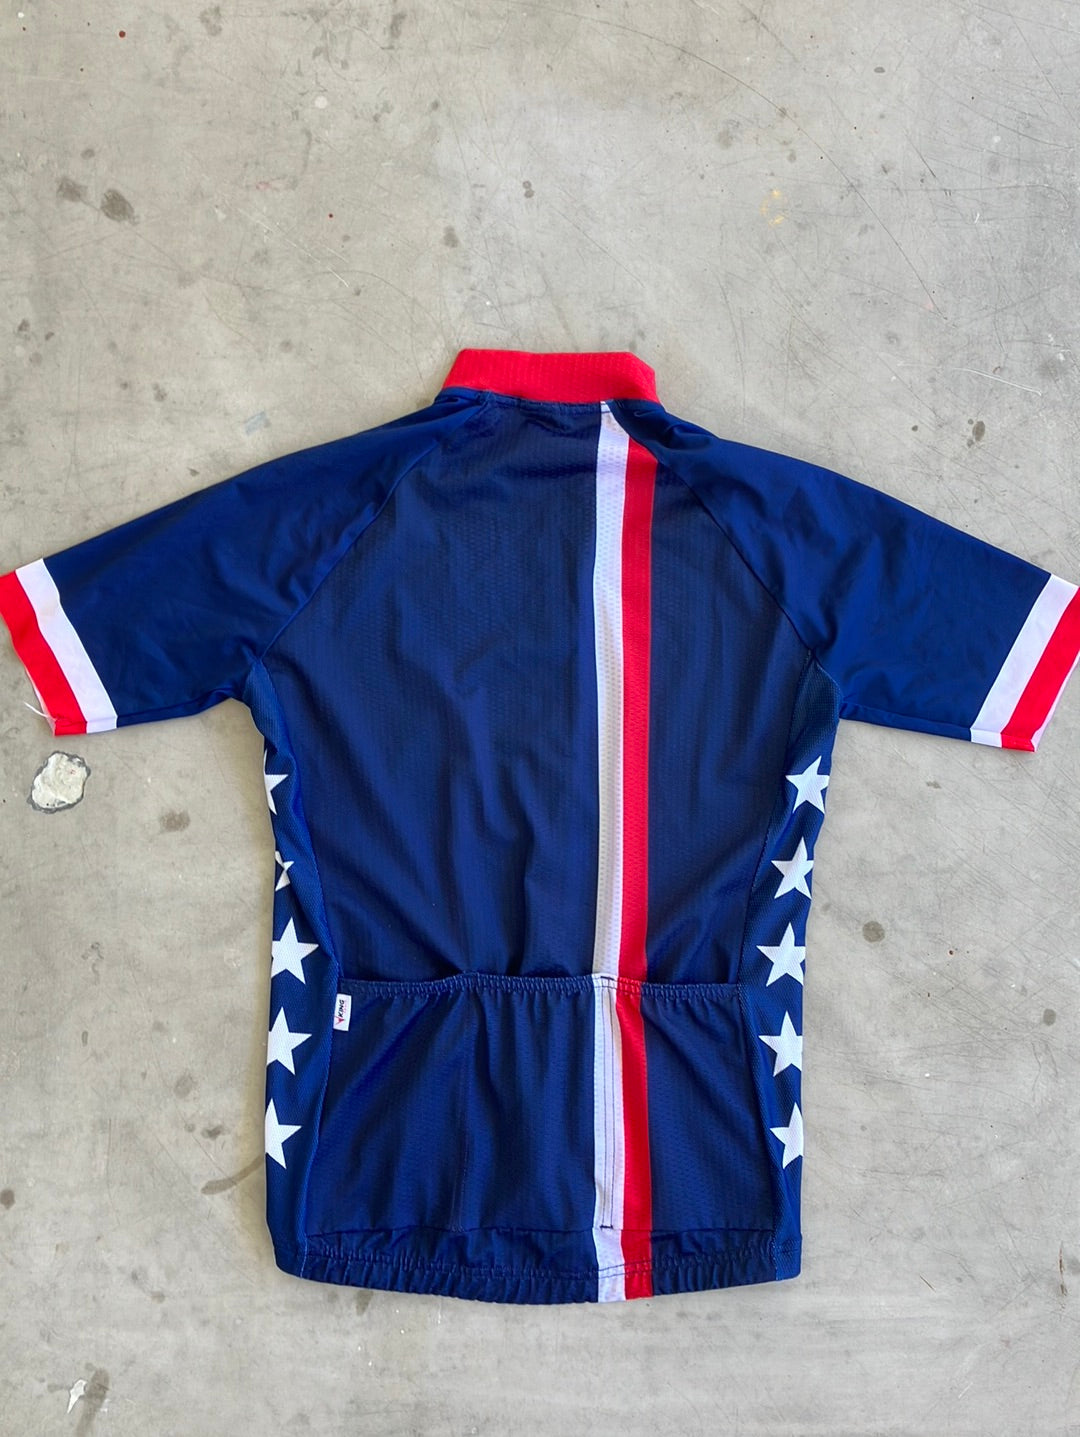 Short Sleeve Jersey | Kings Sports | USA Men National Team | Pro-Issued Cycling Kit